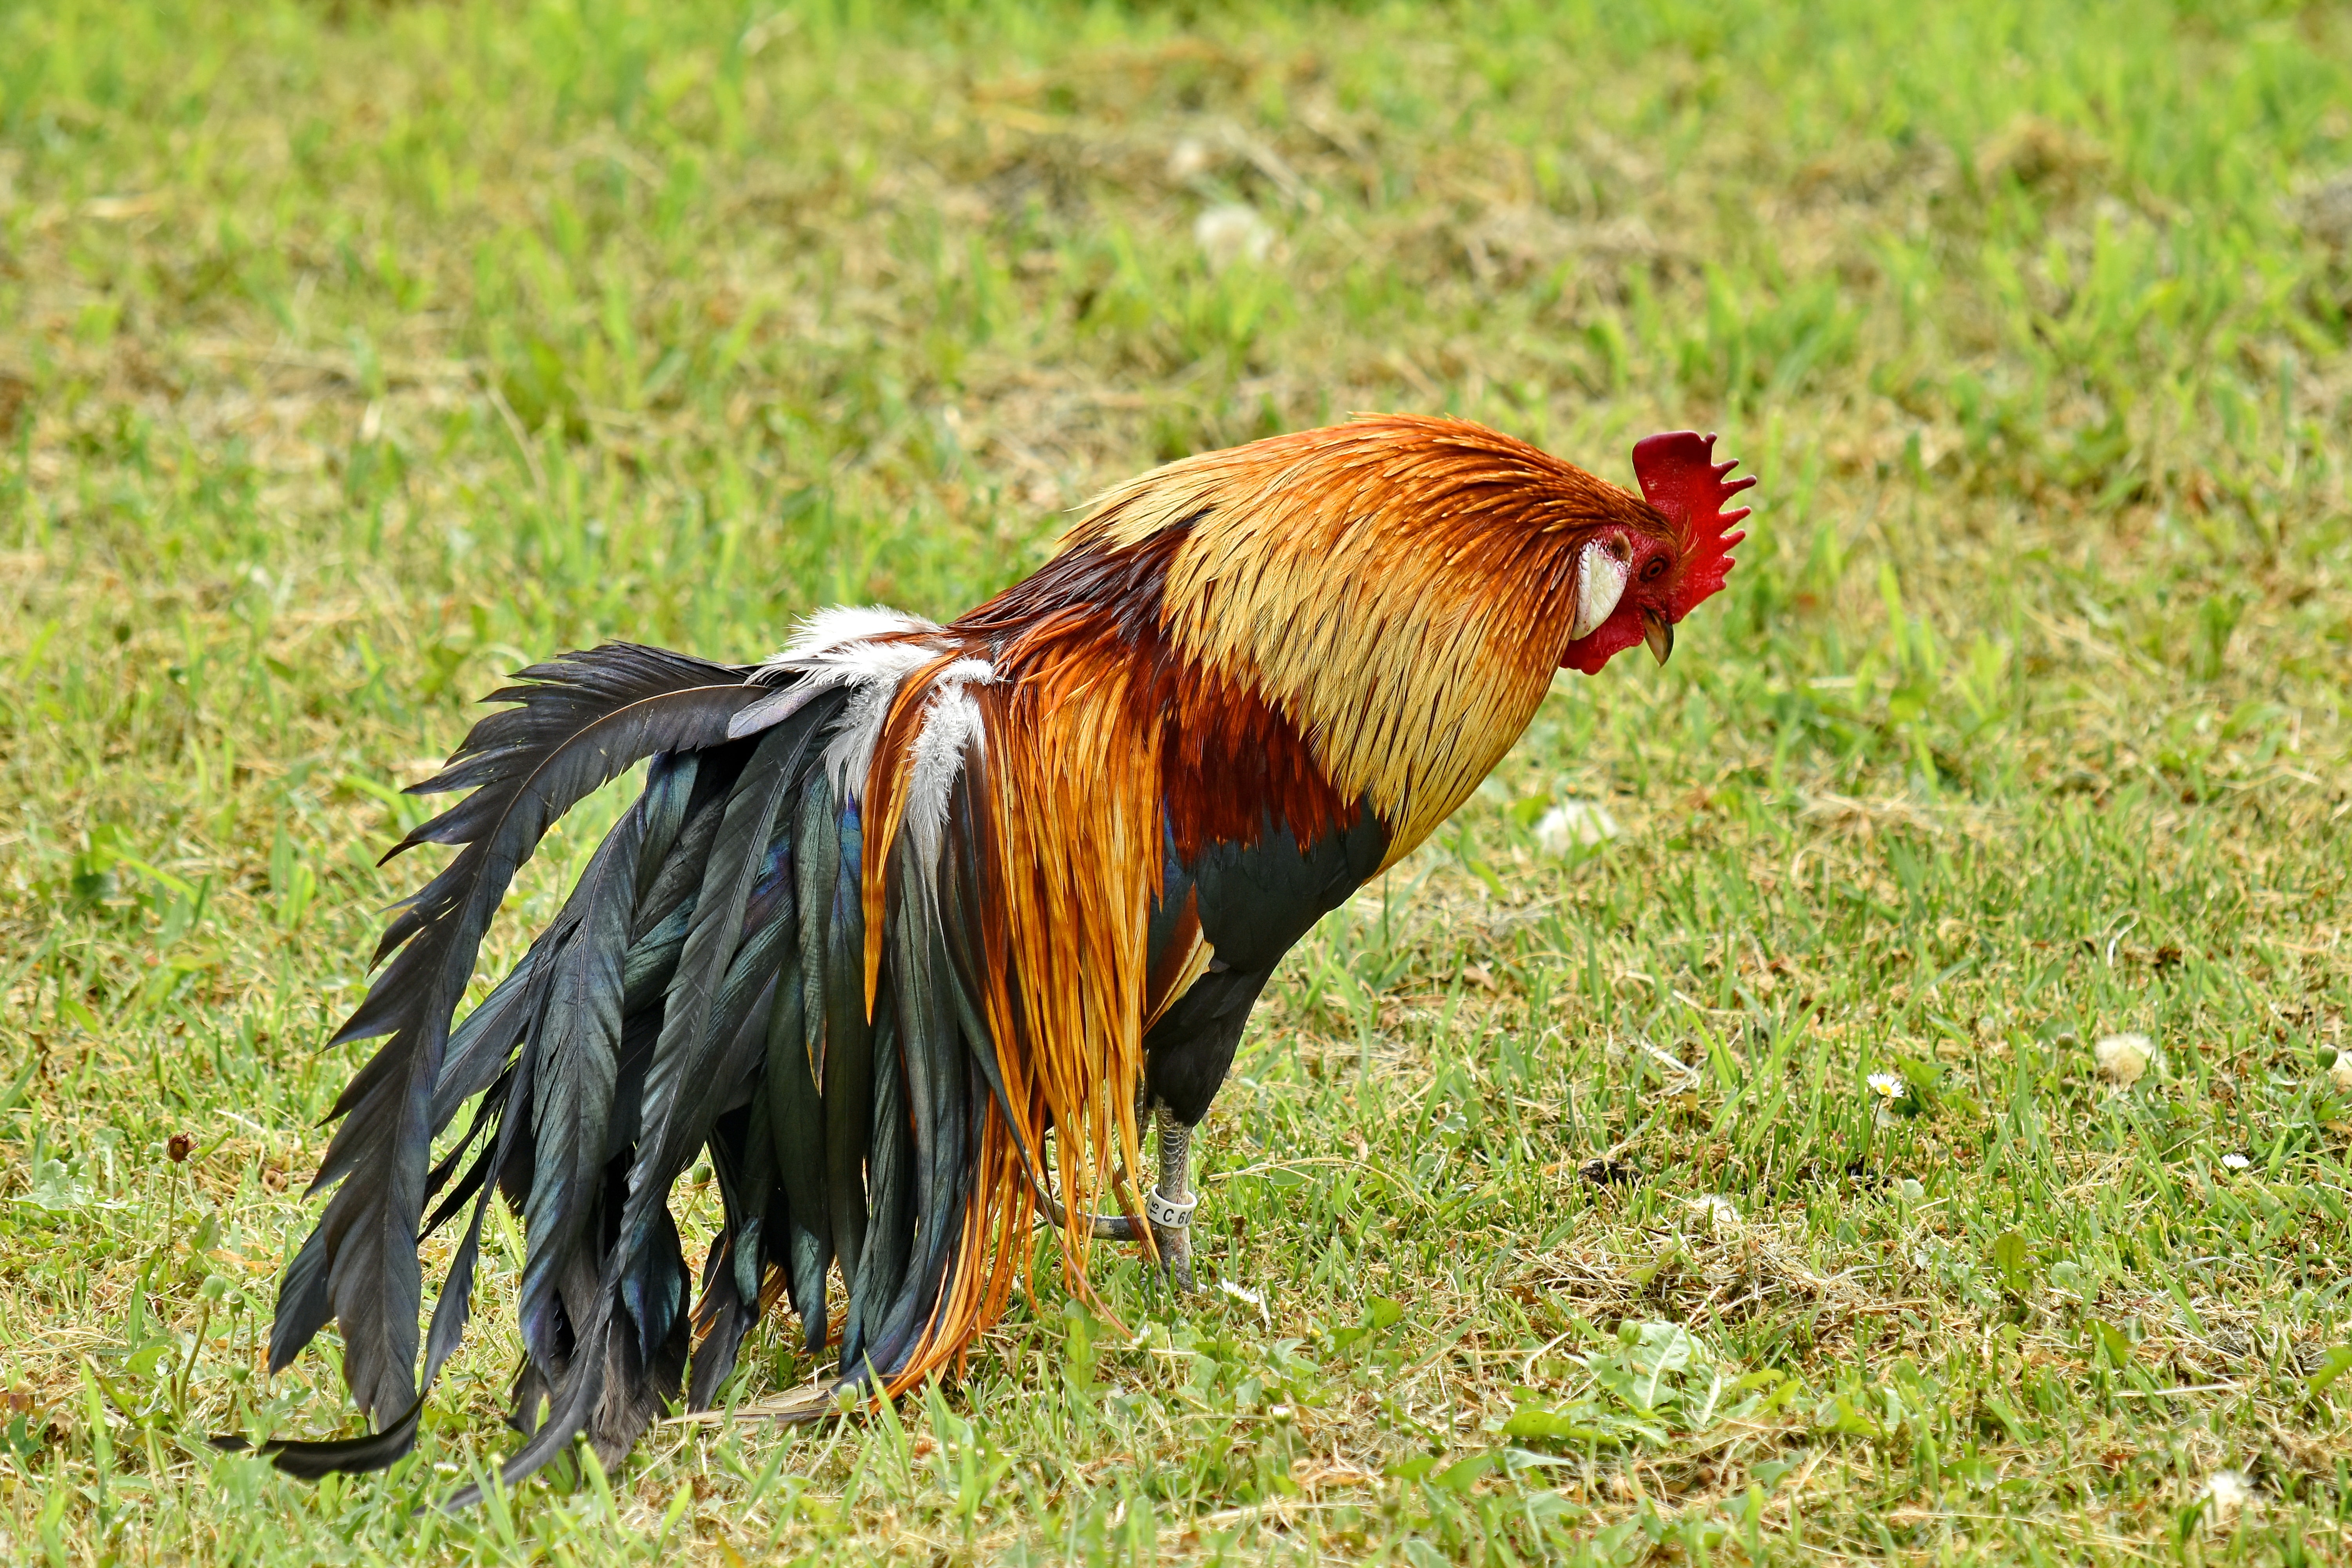 Free picture: colorful, feather, plumage, rooster, tail, farm, bird,  animal, grass, nature